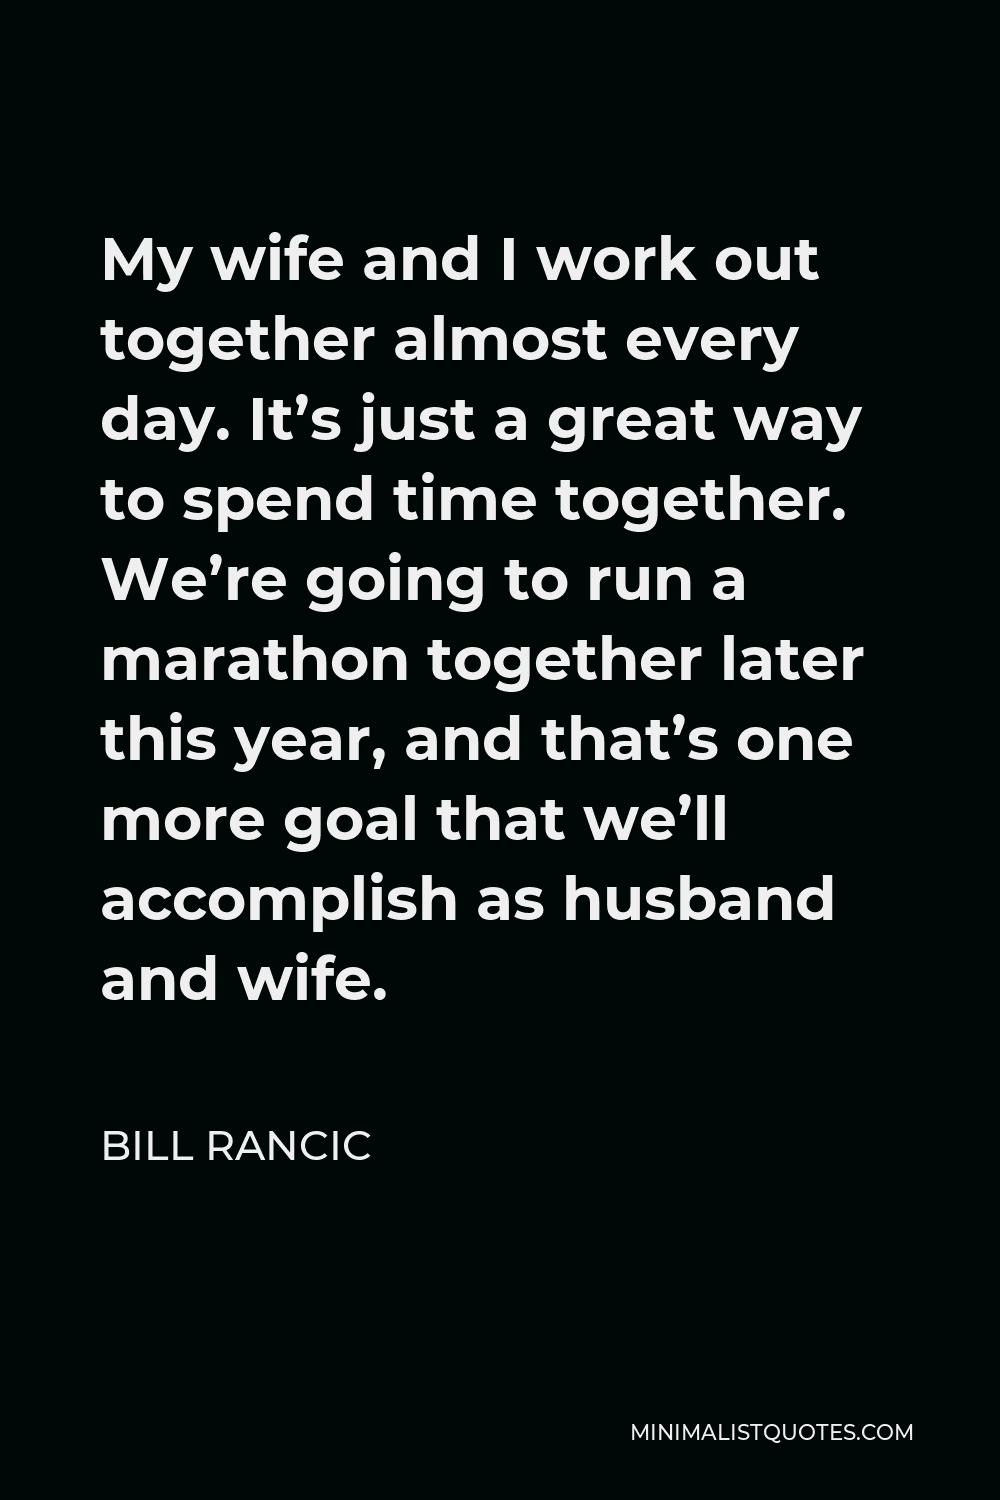 Bill Rancic Quote - My wife and I work out together almost every day. It’s just a great way to spend time together. We’re going to run a marathon together later this year, and that’s one more goal that we’ll accomplish as husband and wife.